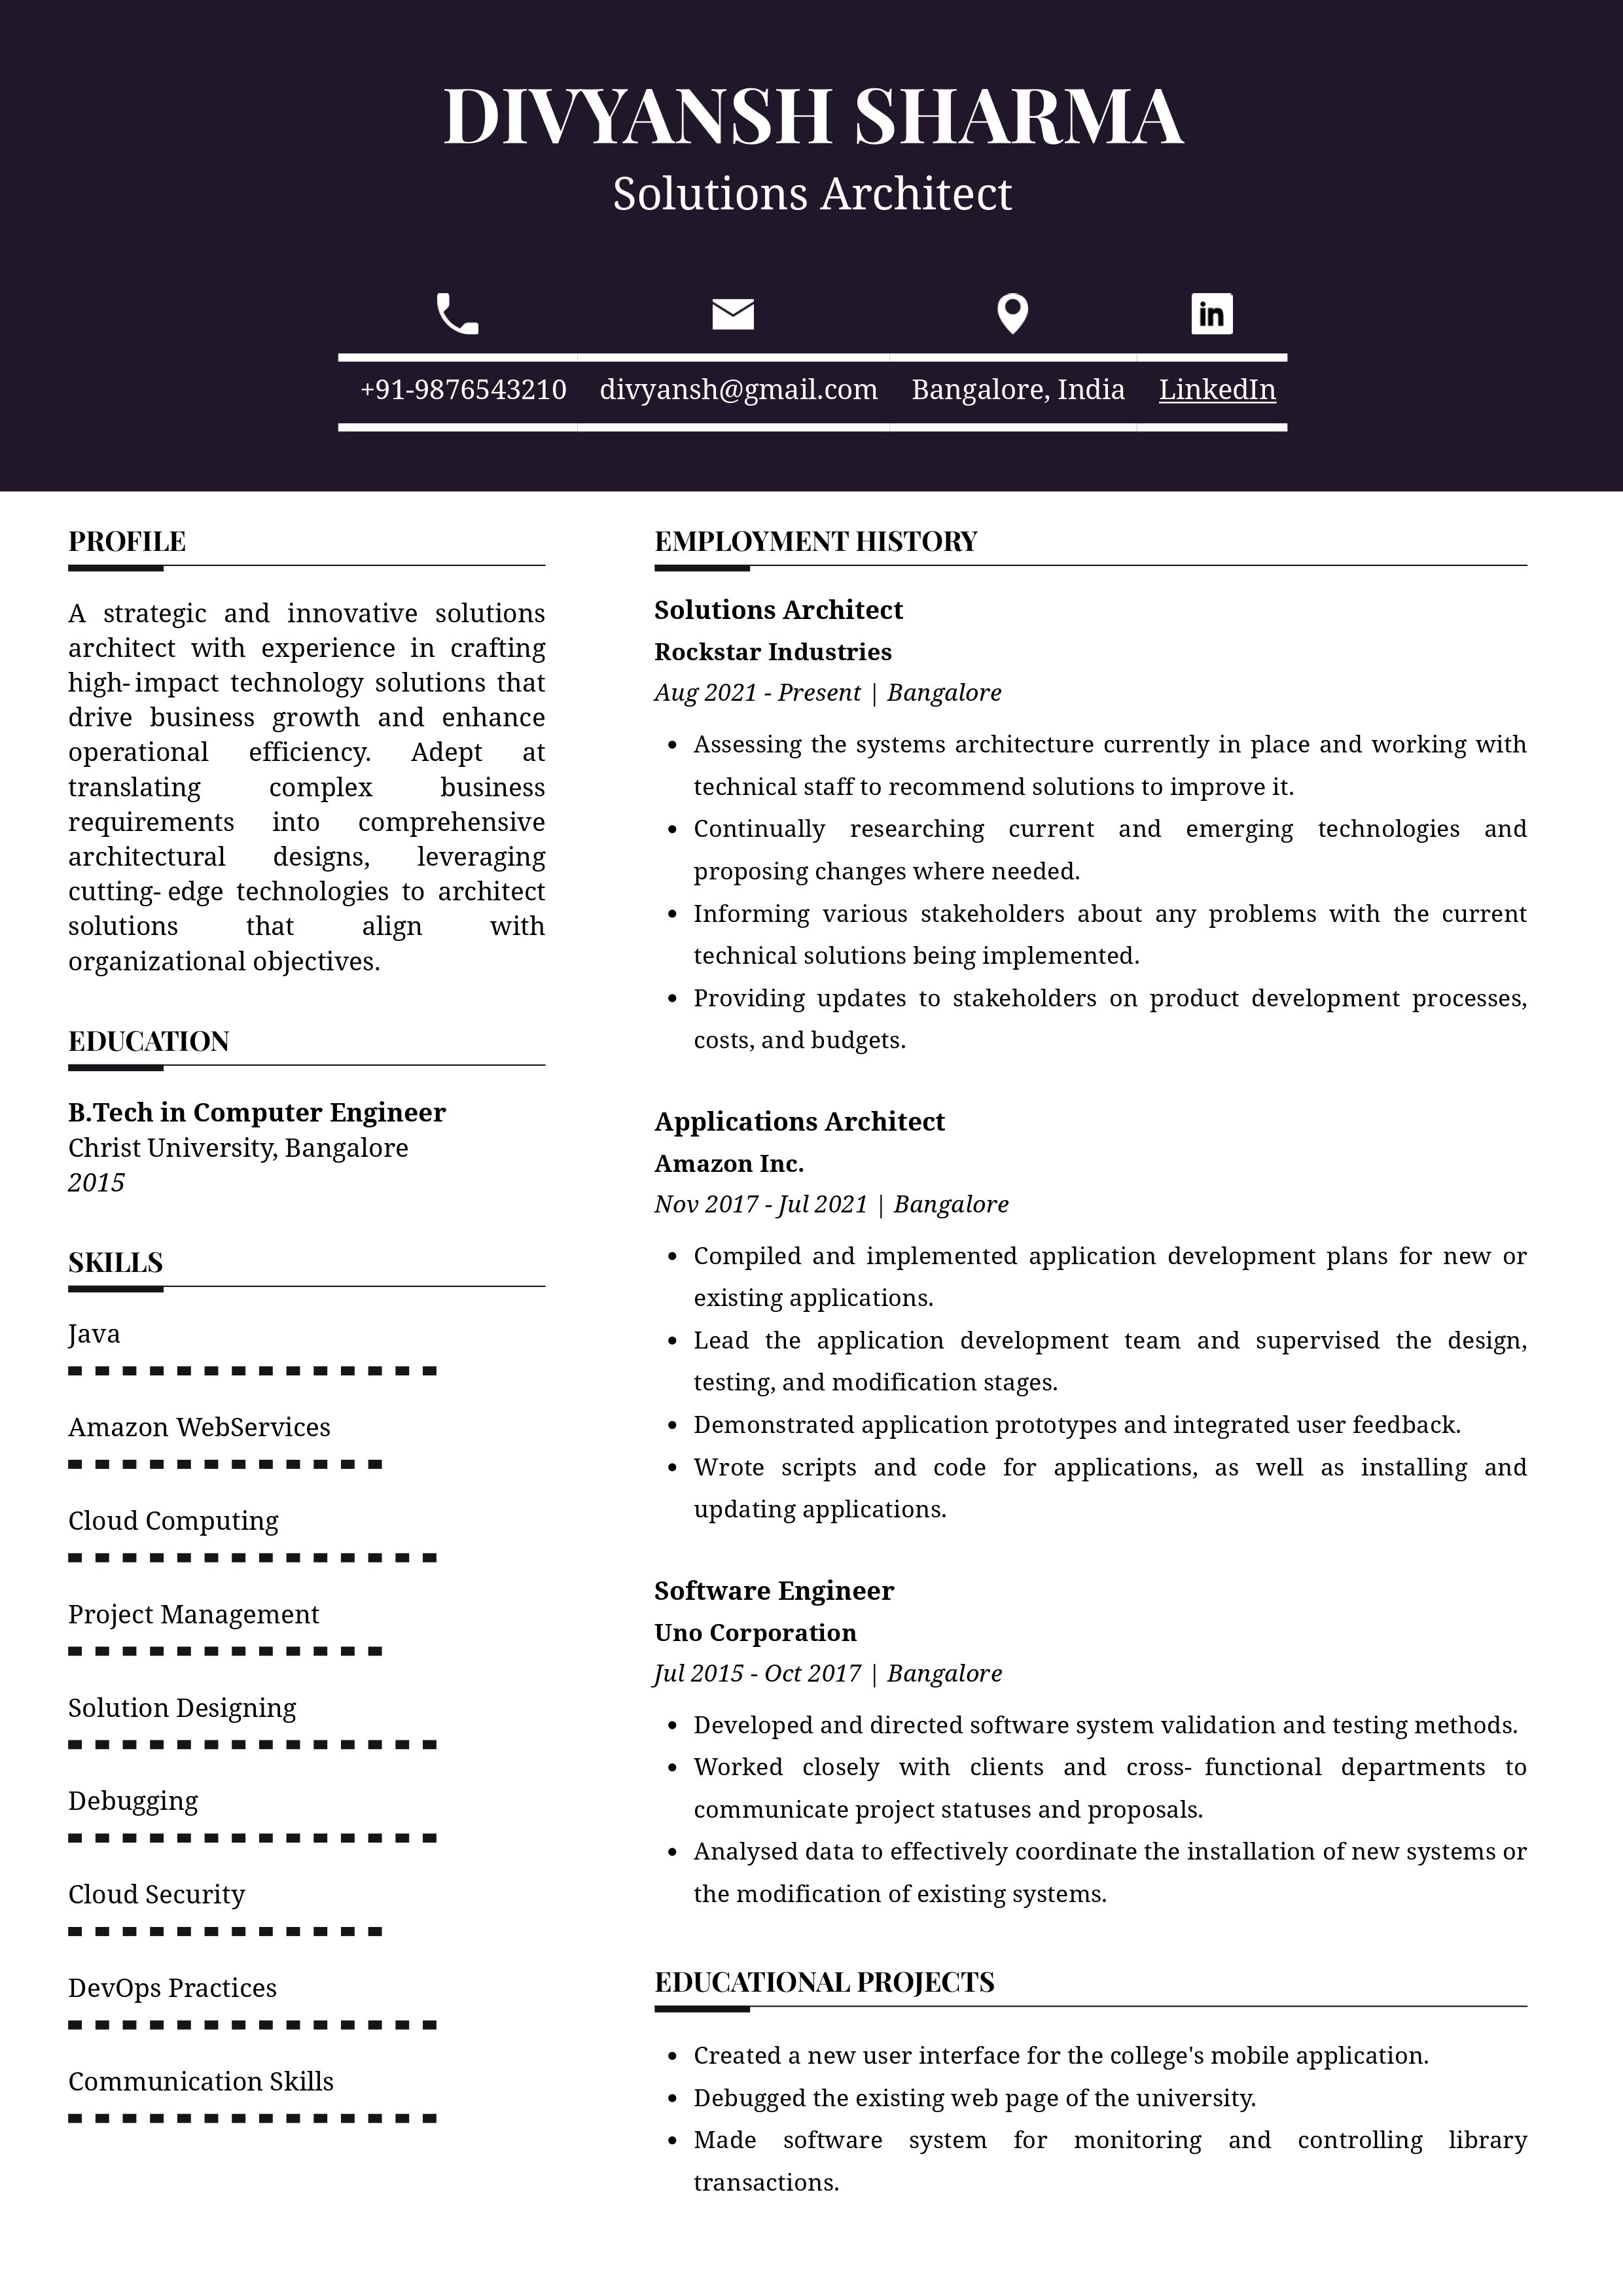 Sample Resume of Solutions Architect | Free Resume Templates & Samples on Resumod.co